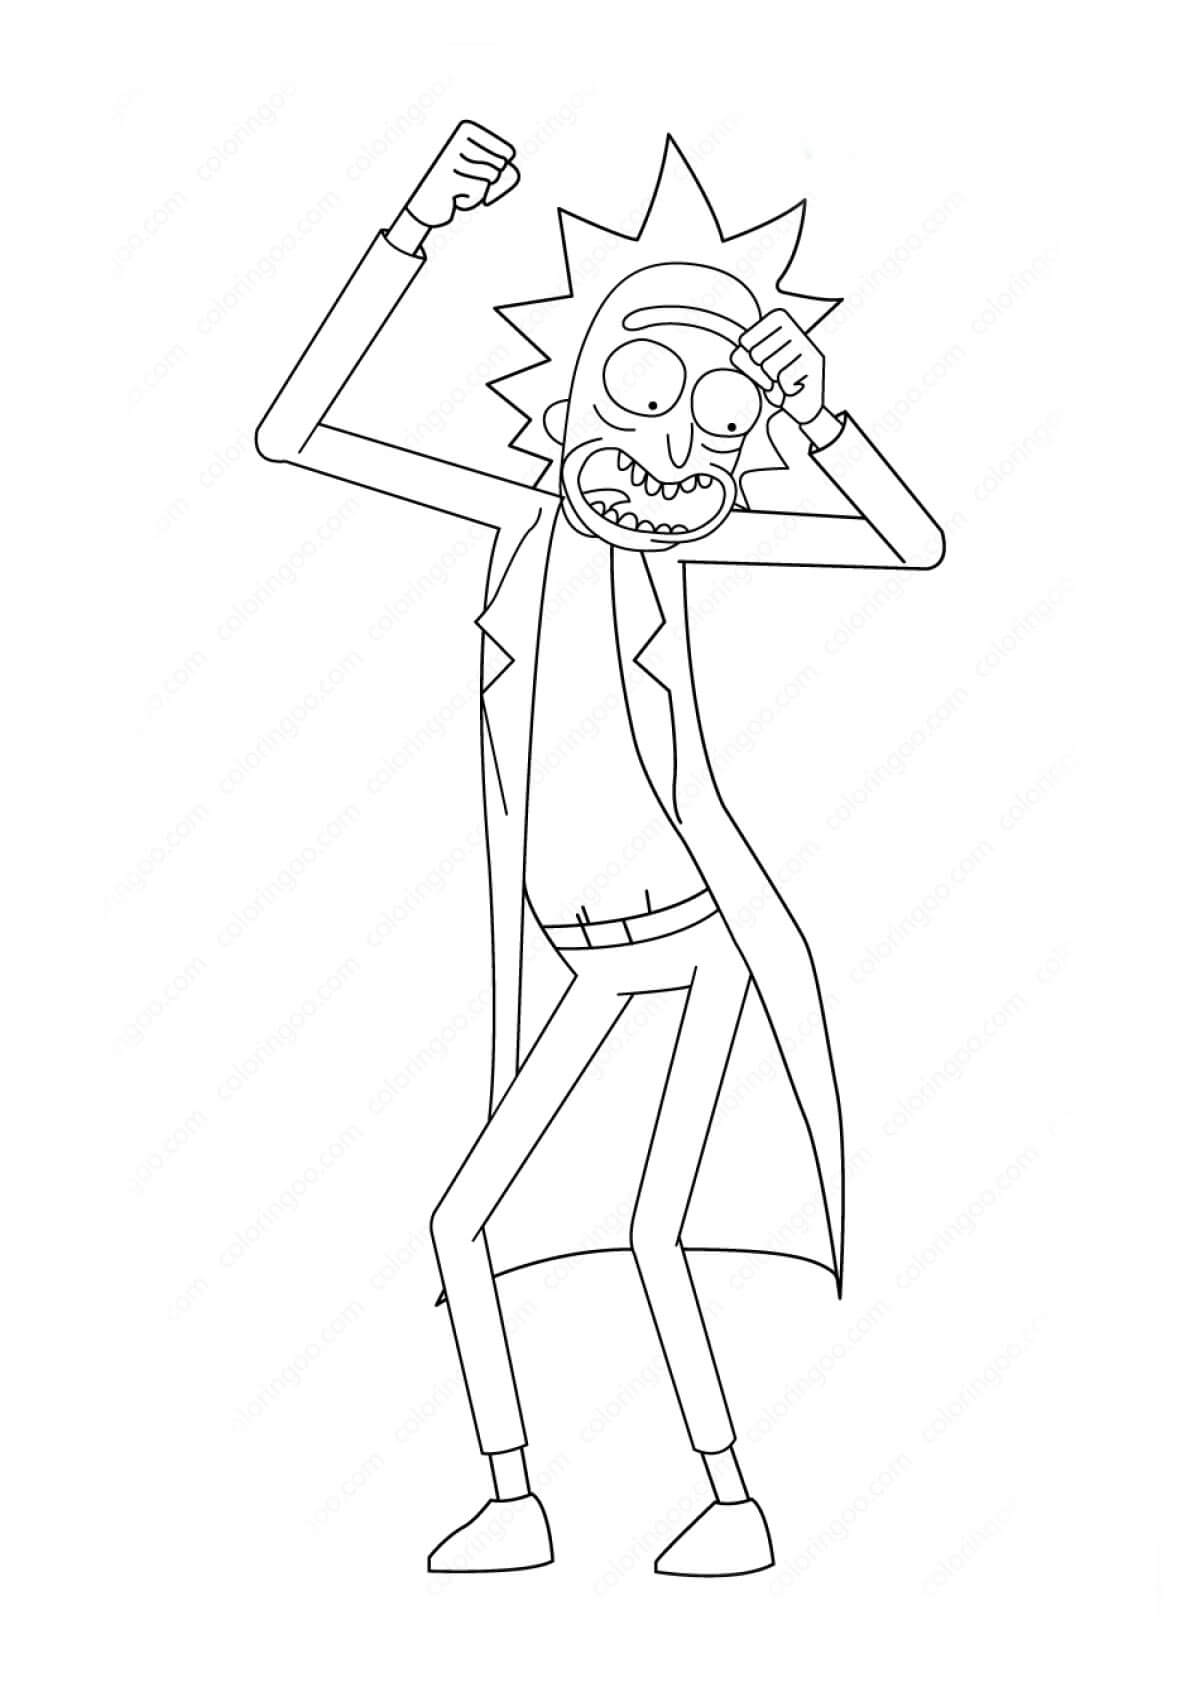 Rick And Morty Coloring Page - Free Printable Templates